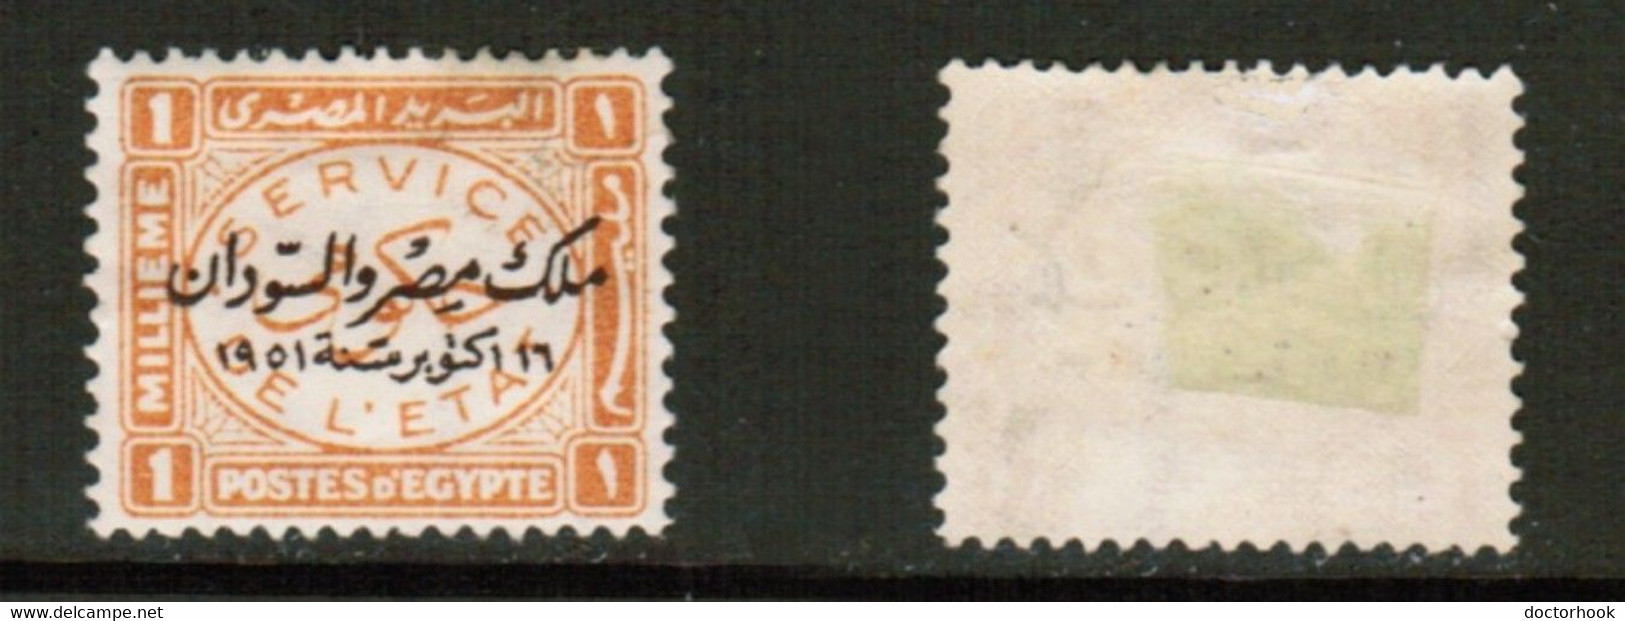 EGYPT   Scott # O60* MINT HINGED (CONDITION AS PER SCAN) (Stamp Scan # 834-12) - Officials